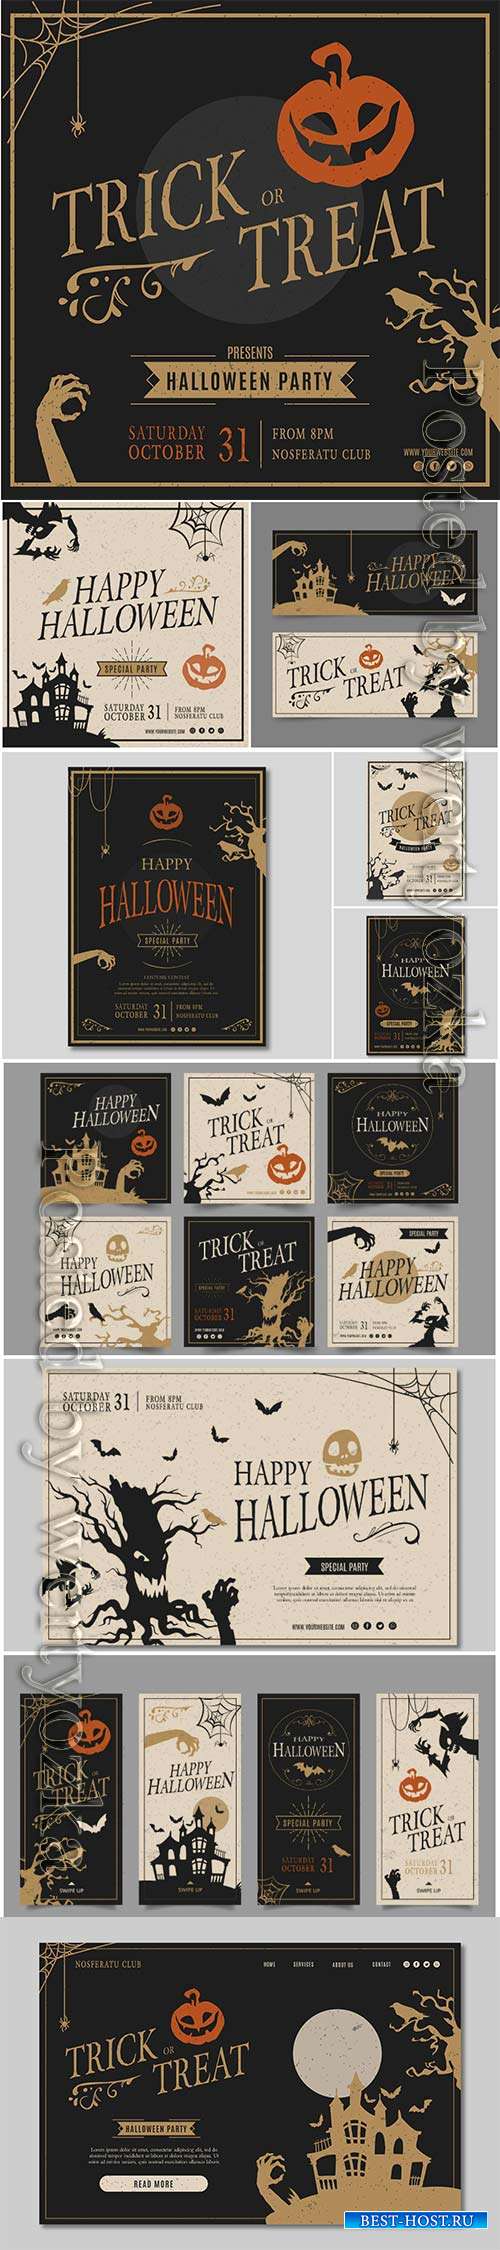 Halloween party squared flyer template